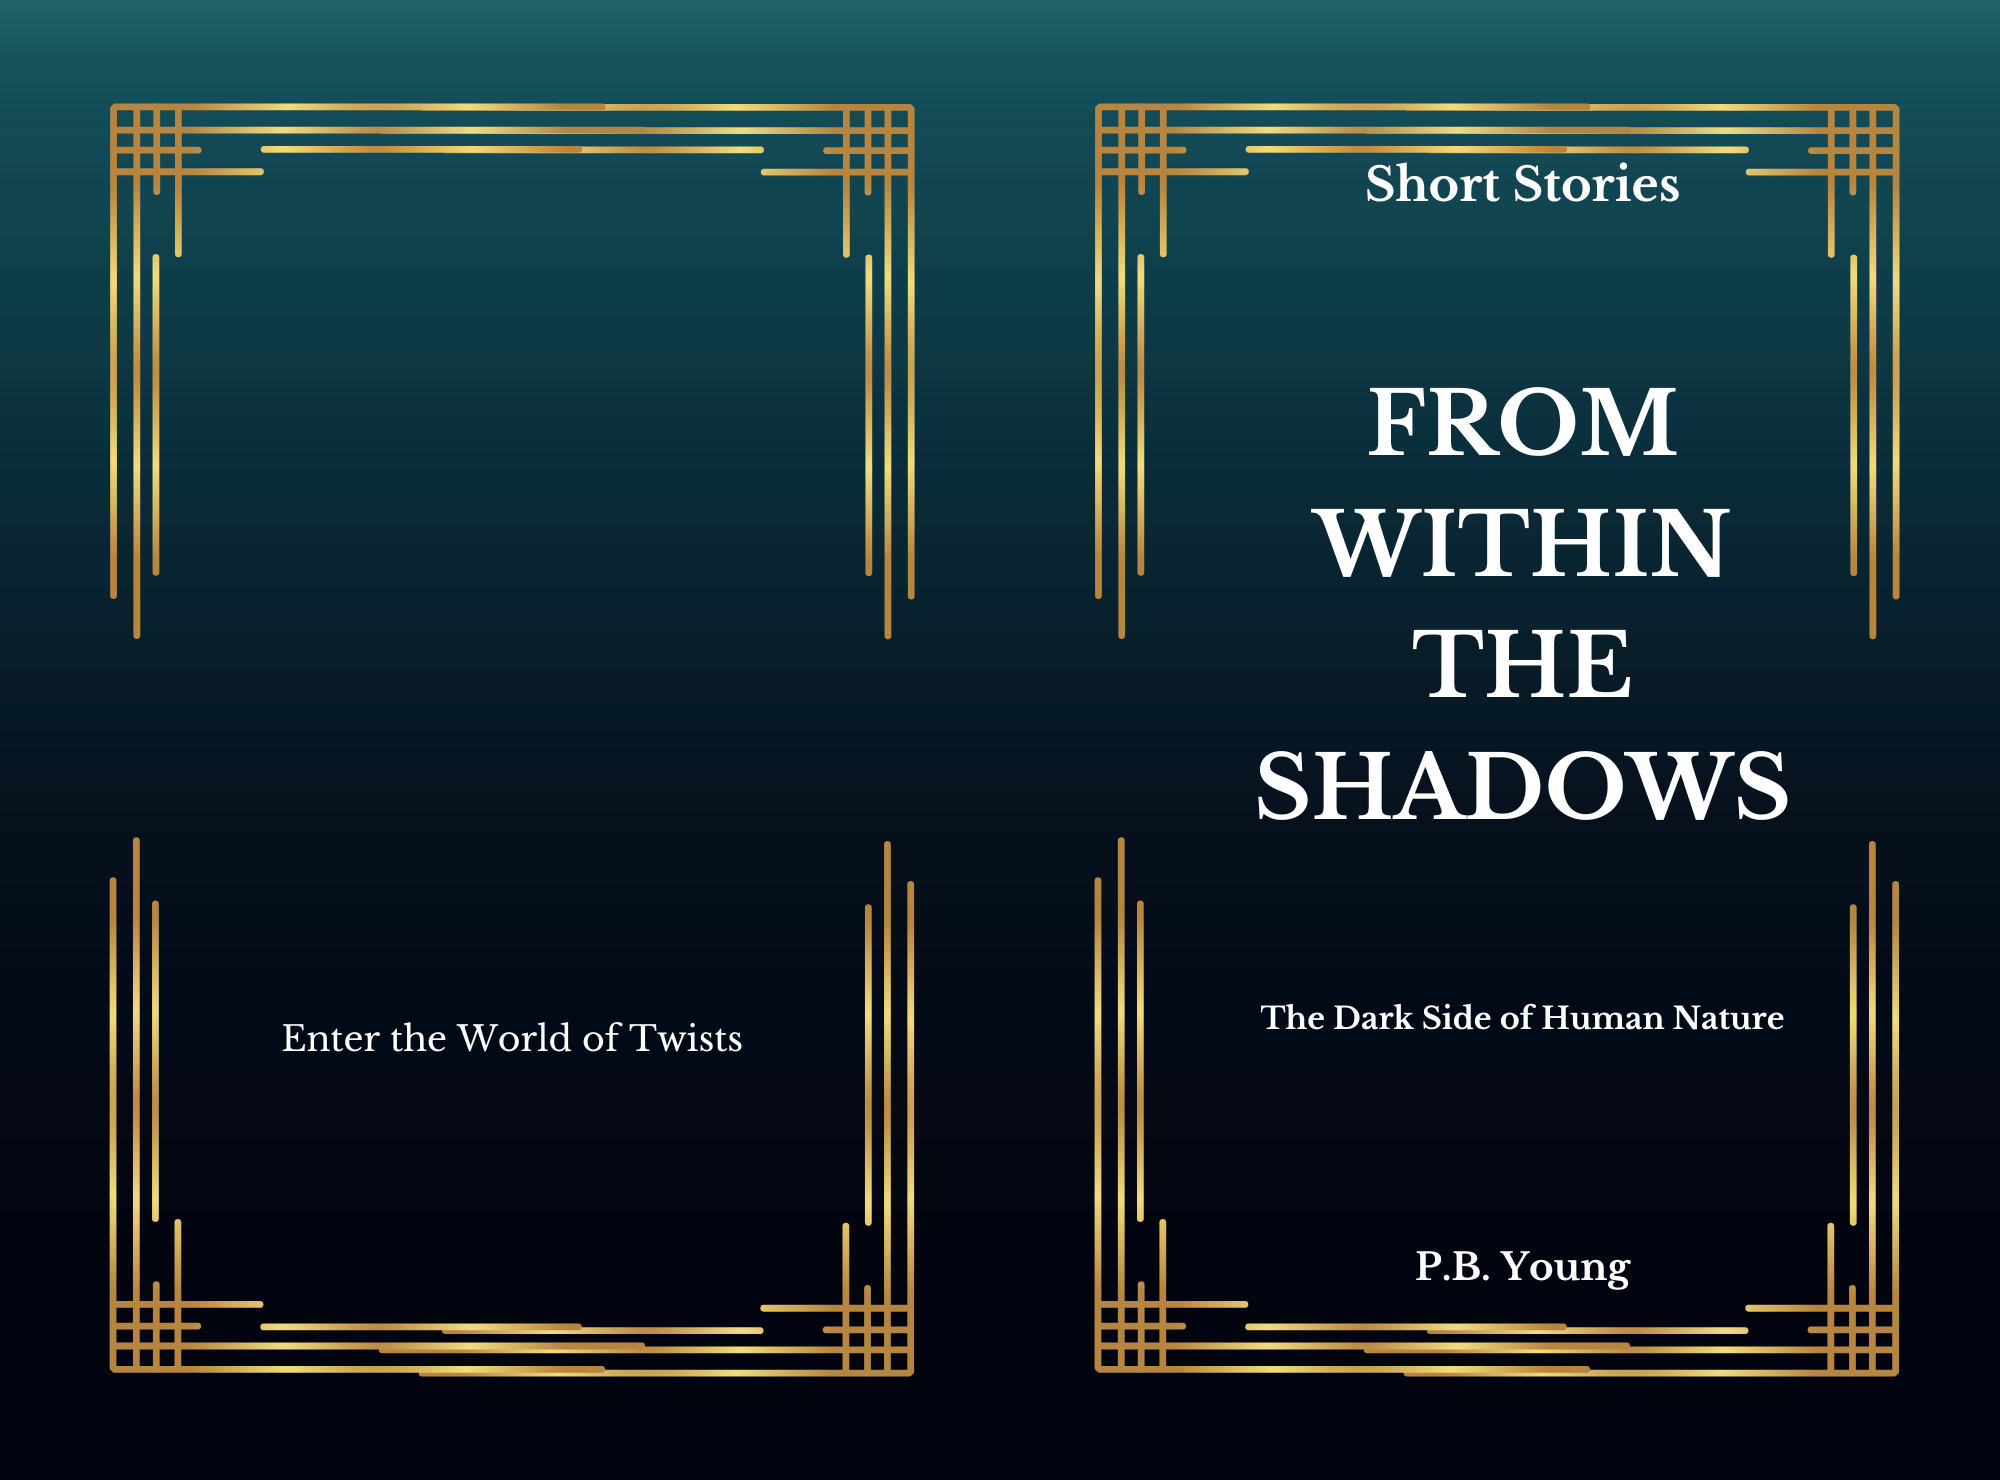 From Withinn the Shadows by P.B. Young